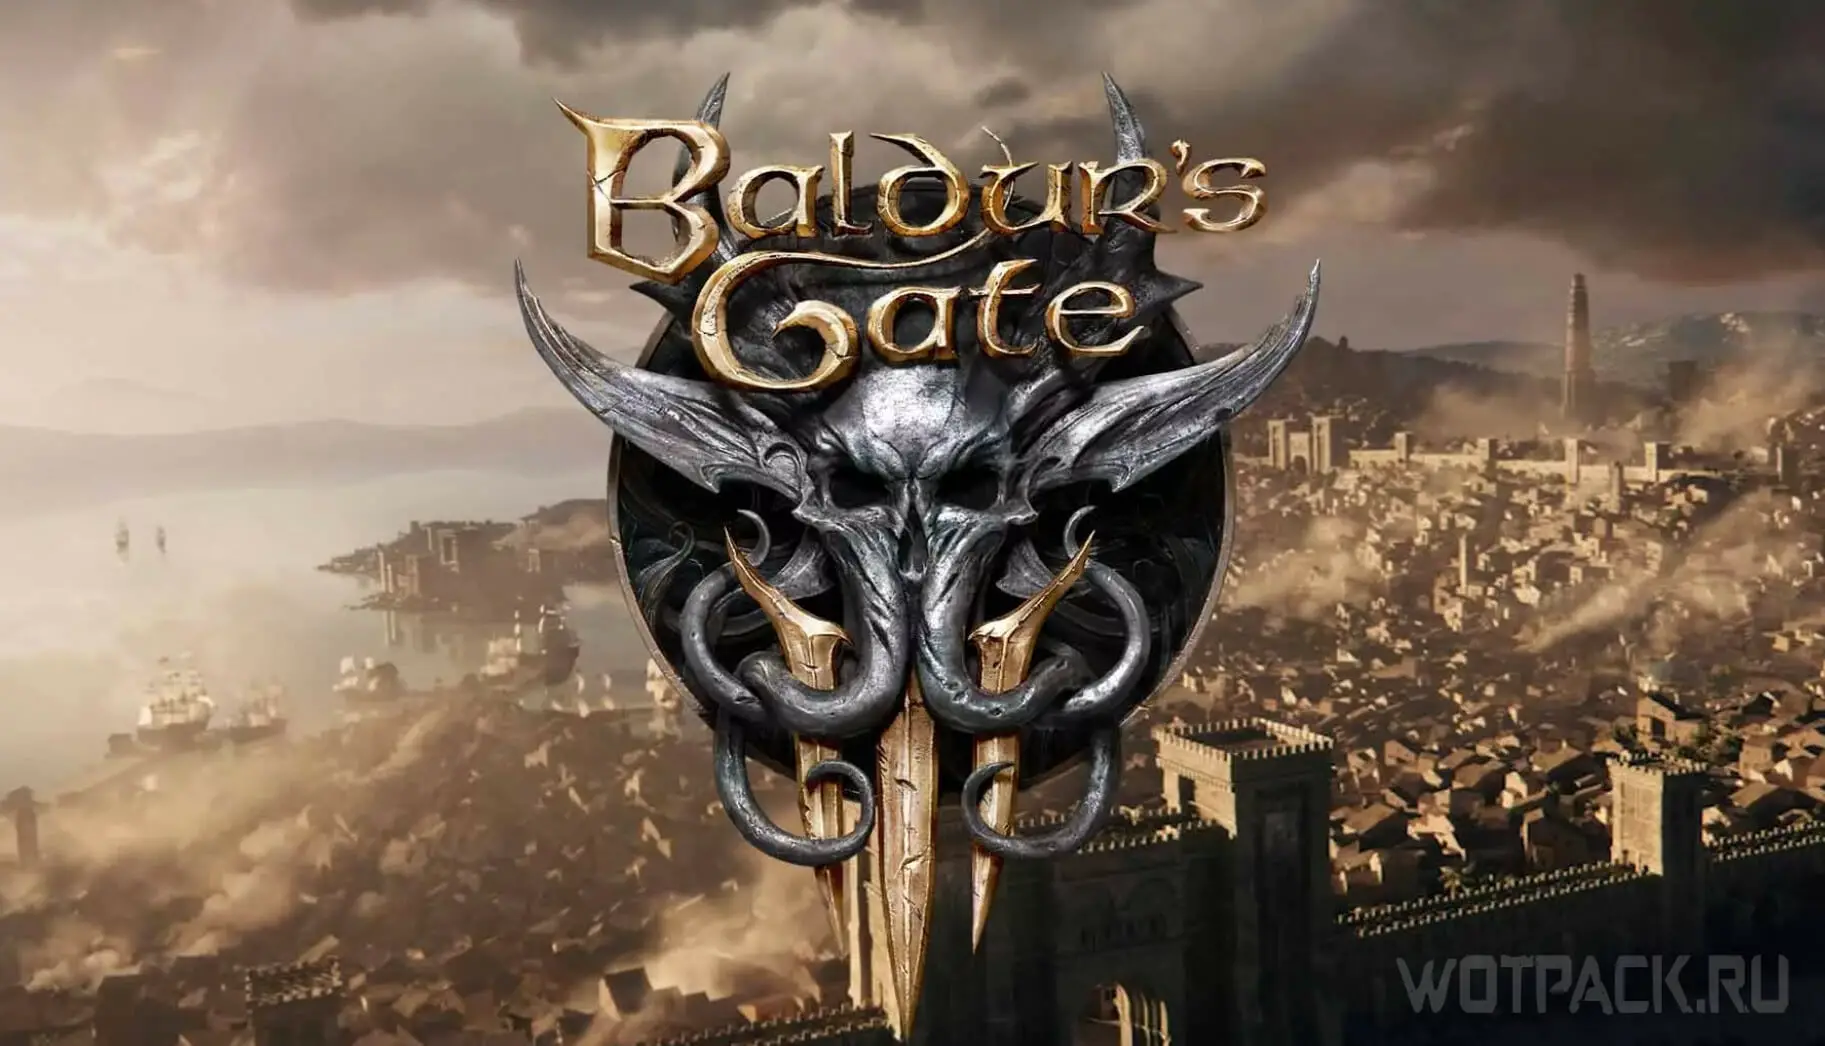 Exploring the Exciting New World of Vaidur’s Gate 3